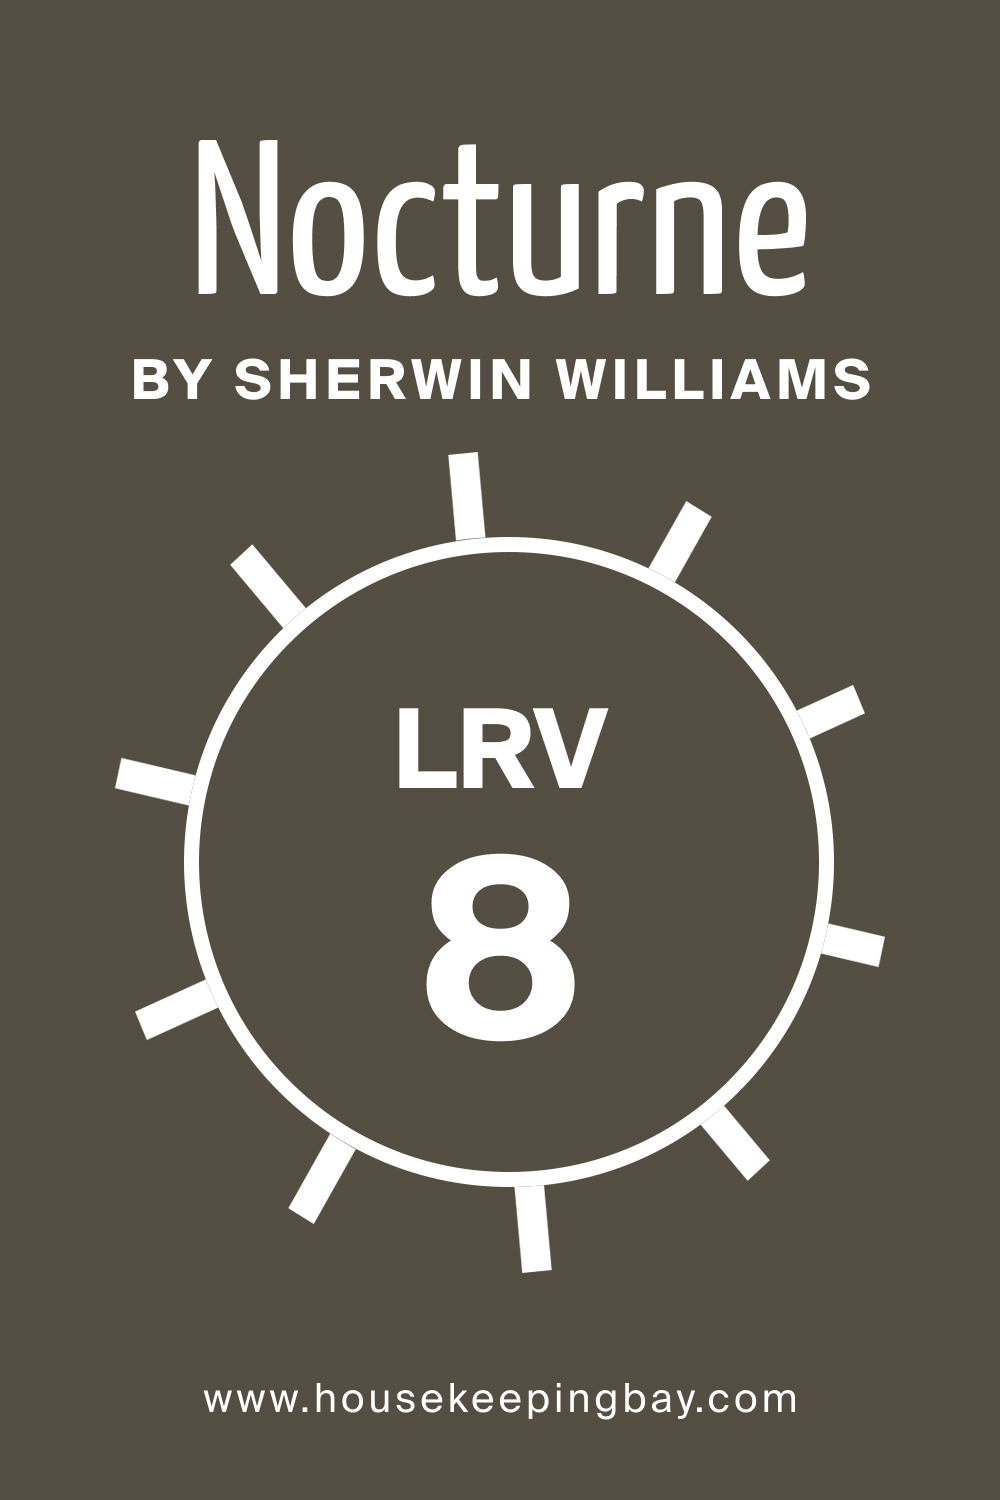 SW 9520 Nocturne by Sherwin Williams. LRV 8